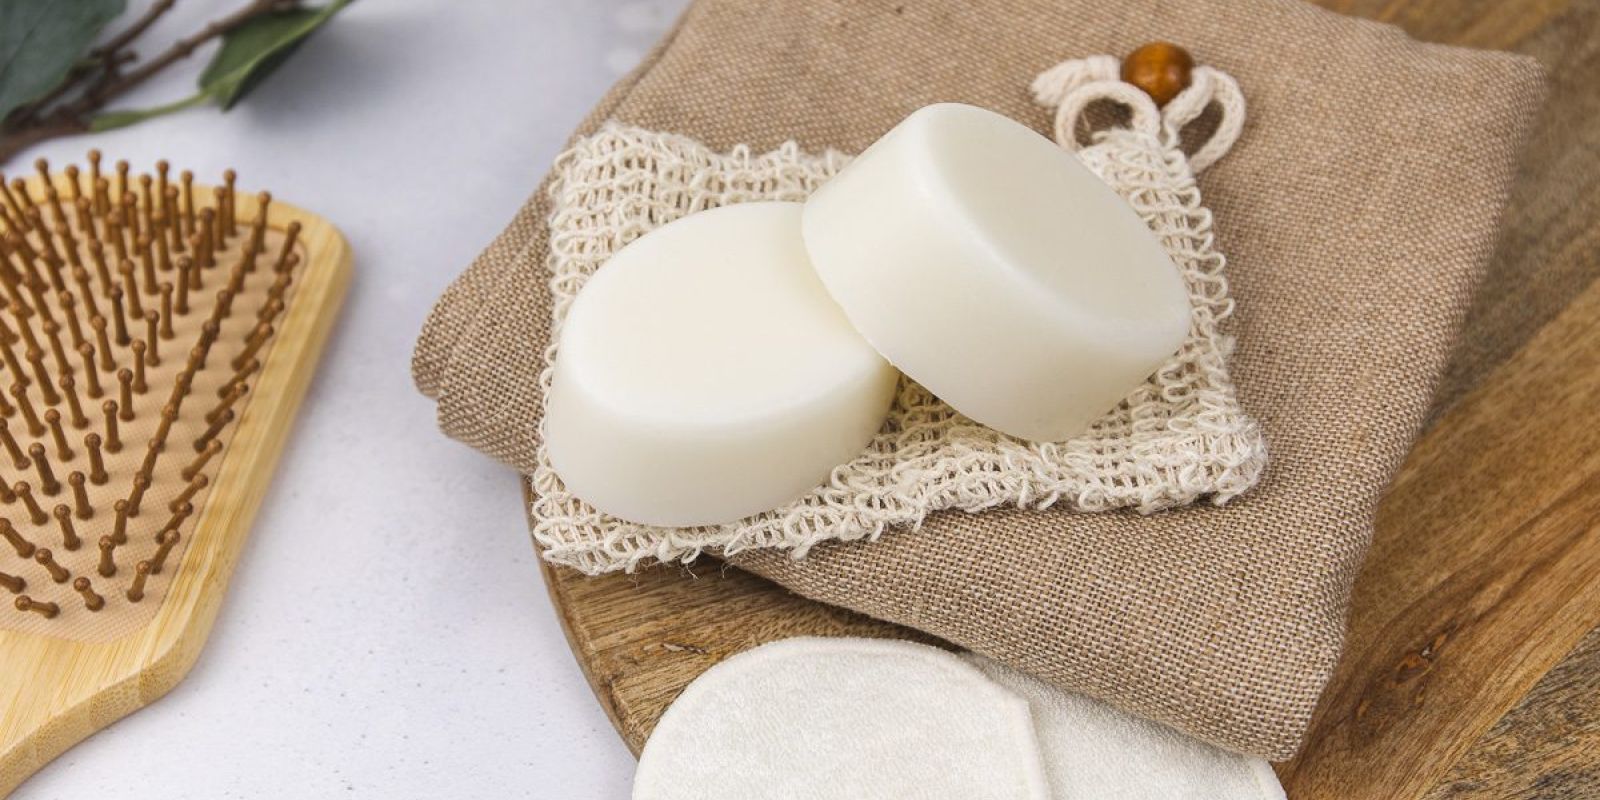 Everything You Need To Know About Conditioner Bars admin ajax.php?action=kernel&p=image&src=%7B%22file%22%3A%22wp content%2Fuploads%2F2021%2F03%2Fpurcorganics conditioner bars